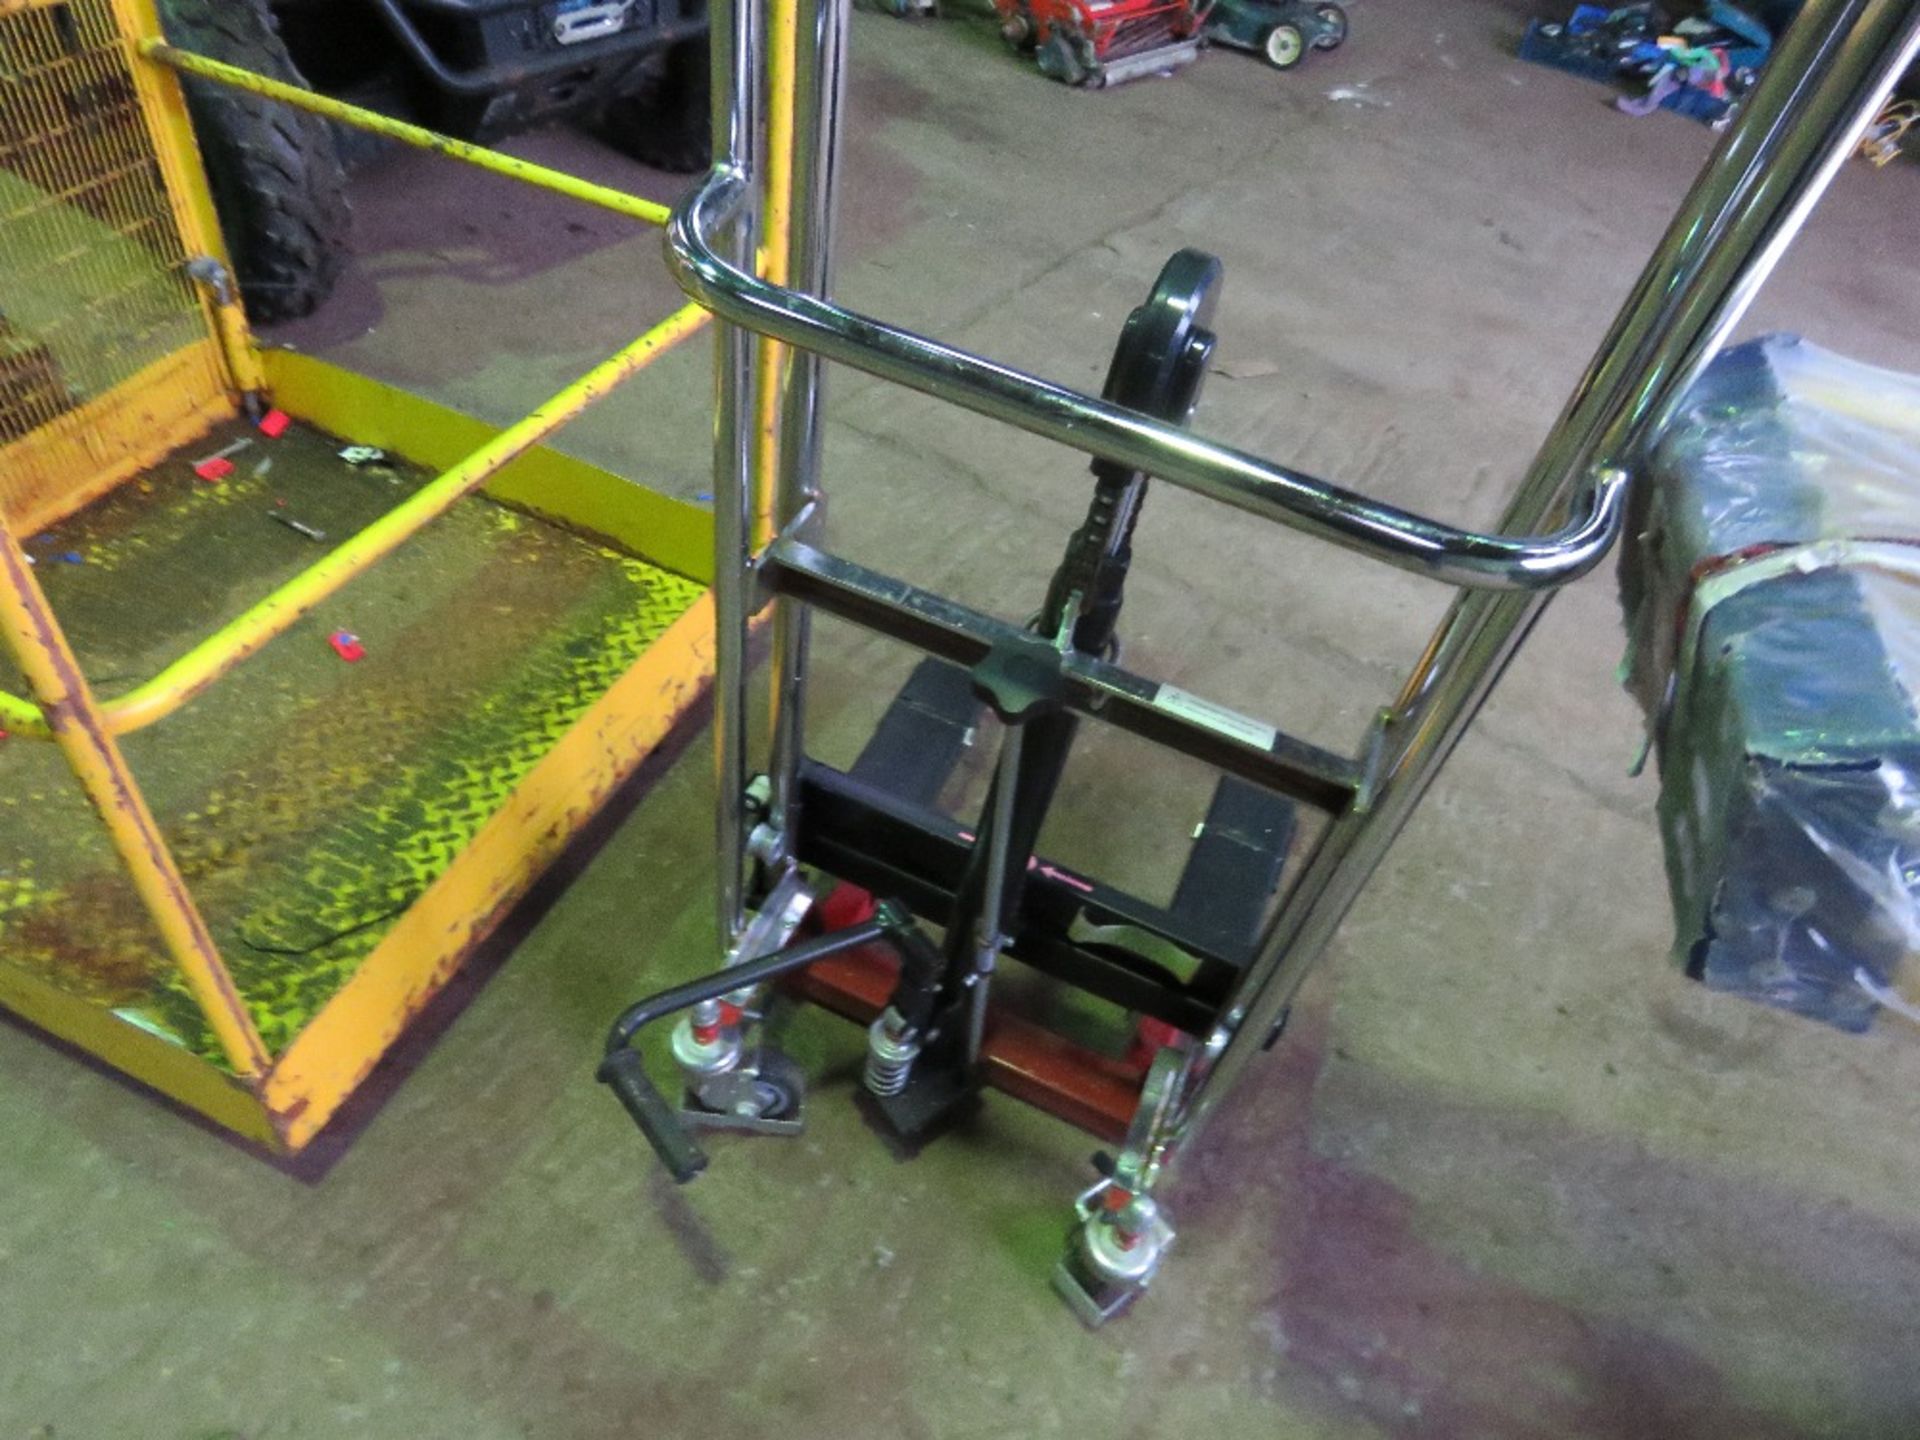 PLAST GROMMET COMPACT HYDRAULIC LIFT TRUCK, APPEARS LITTLE USED, FOOT OPERATED. WHEN TESTED WAS SEEN